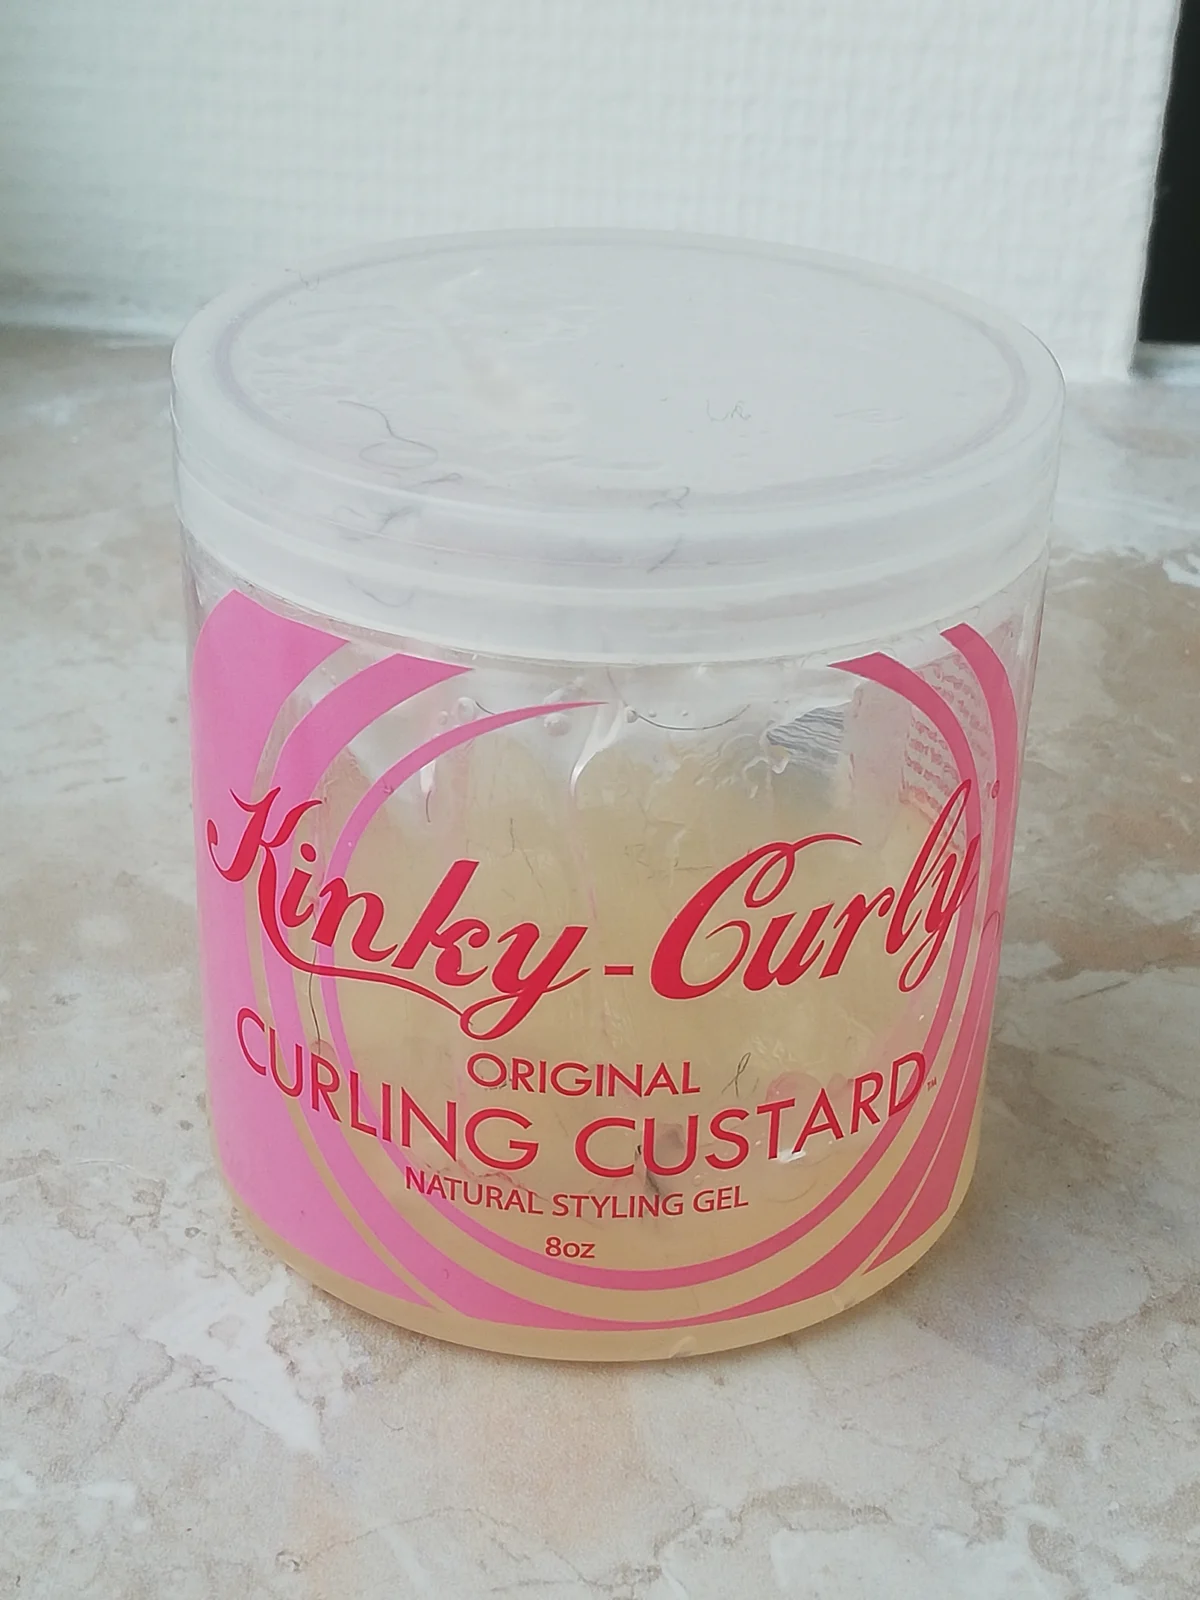 Kinky Curly Curling Custard - review image